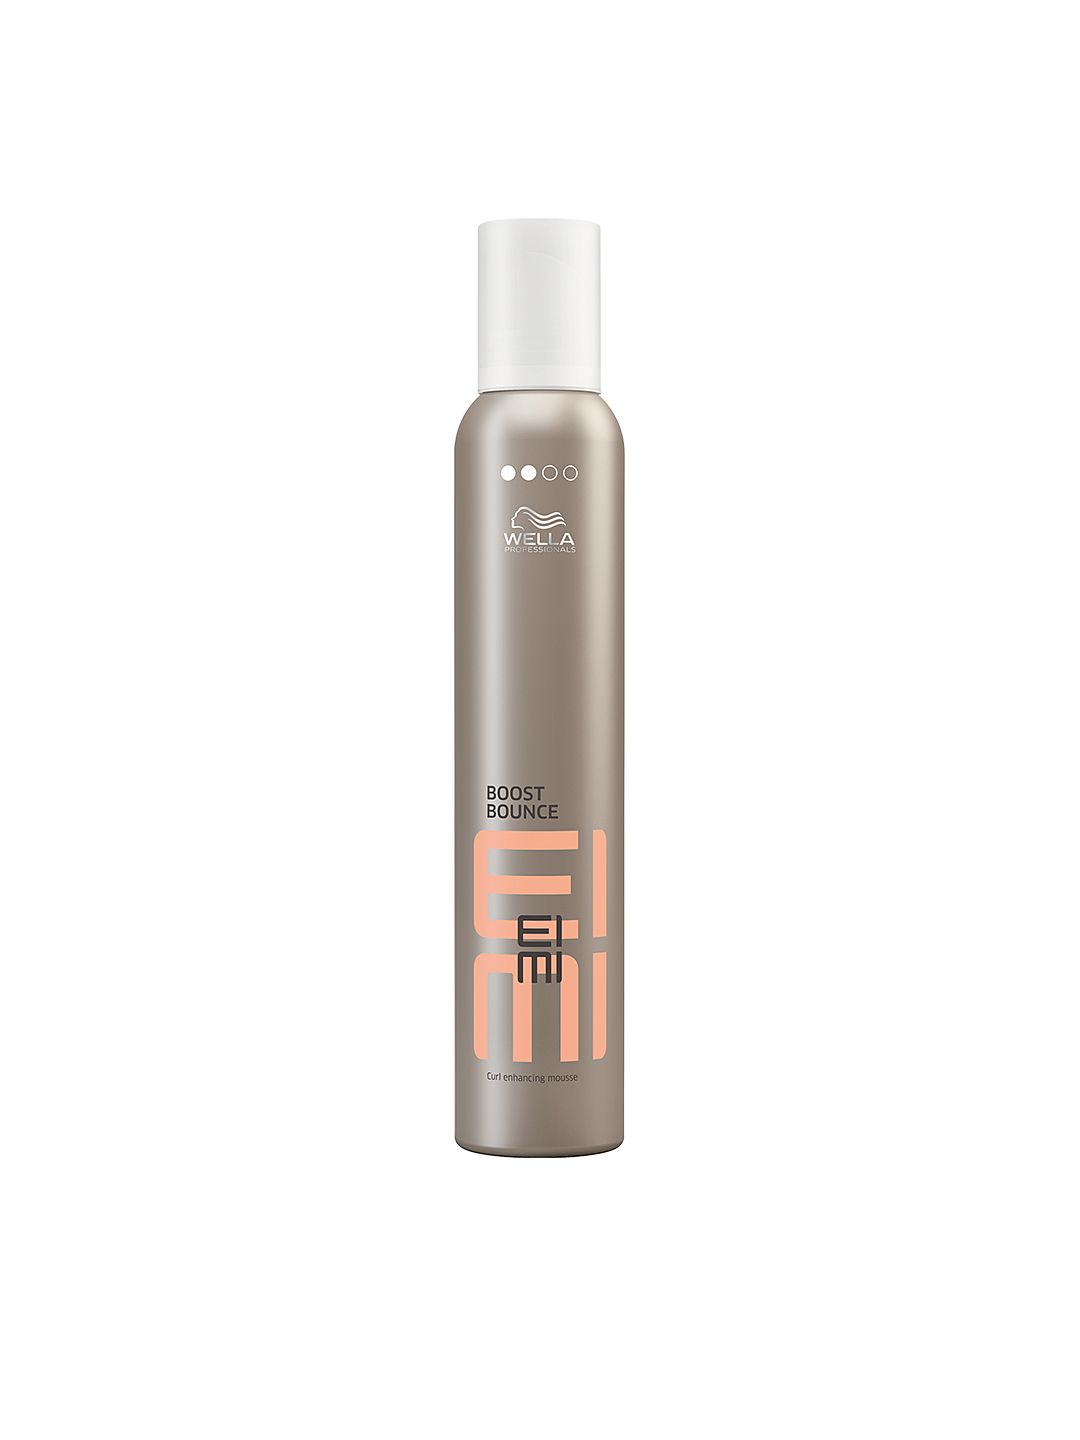 WELLA PROFESSIONALS EIMI Unisex Boost Bounce Hair Mousse 300 ml Price in India